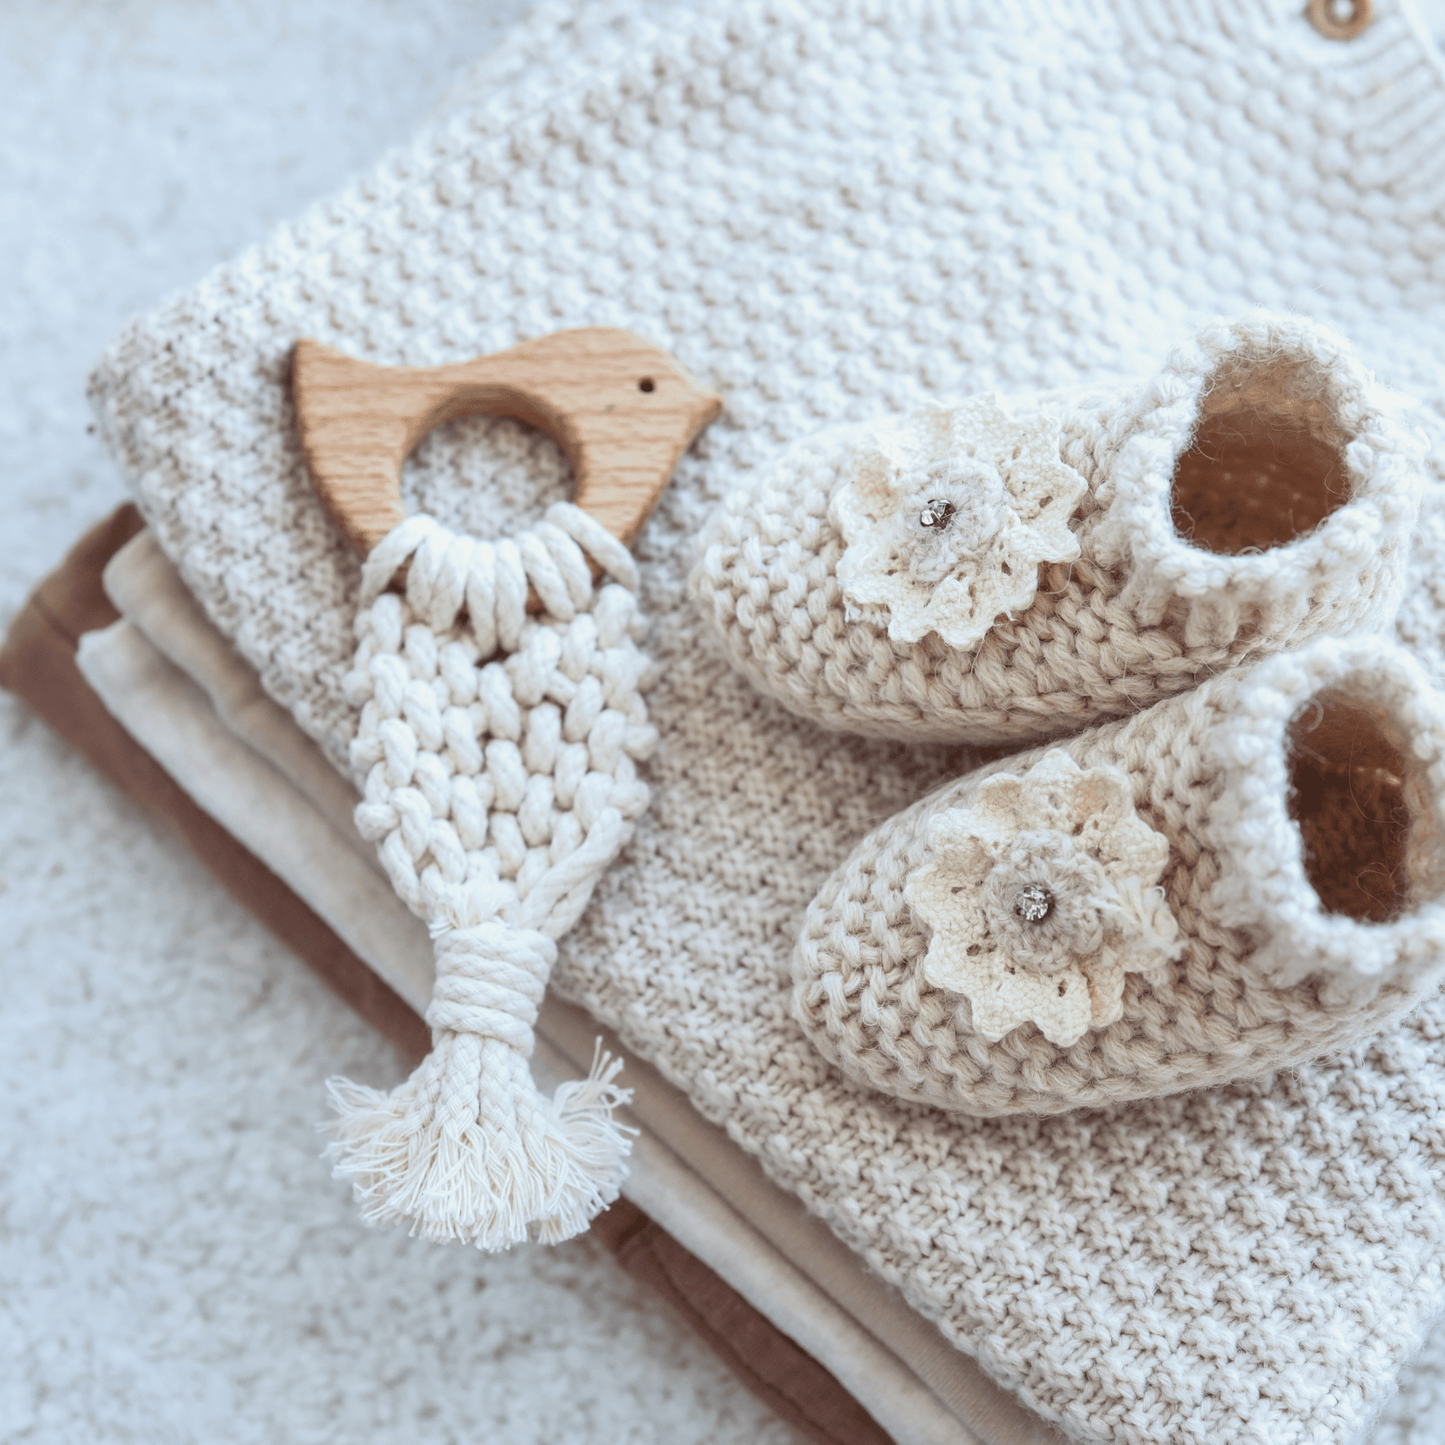 6-Month-Prepaid Hooks & Needles Subscription Box #23 and a wooden teether on a folded blanket, all in neutral colors, displaying intricate texture and soft materials.